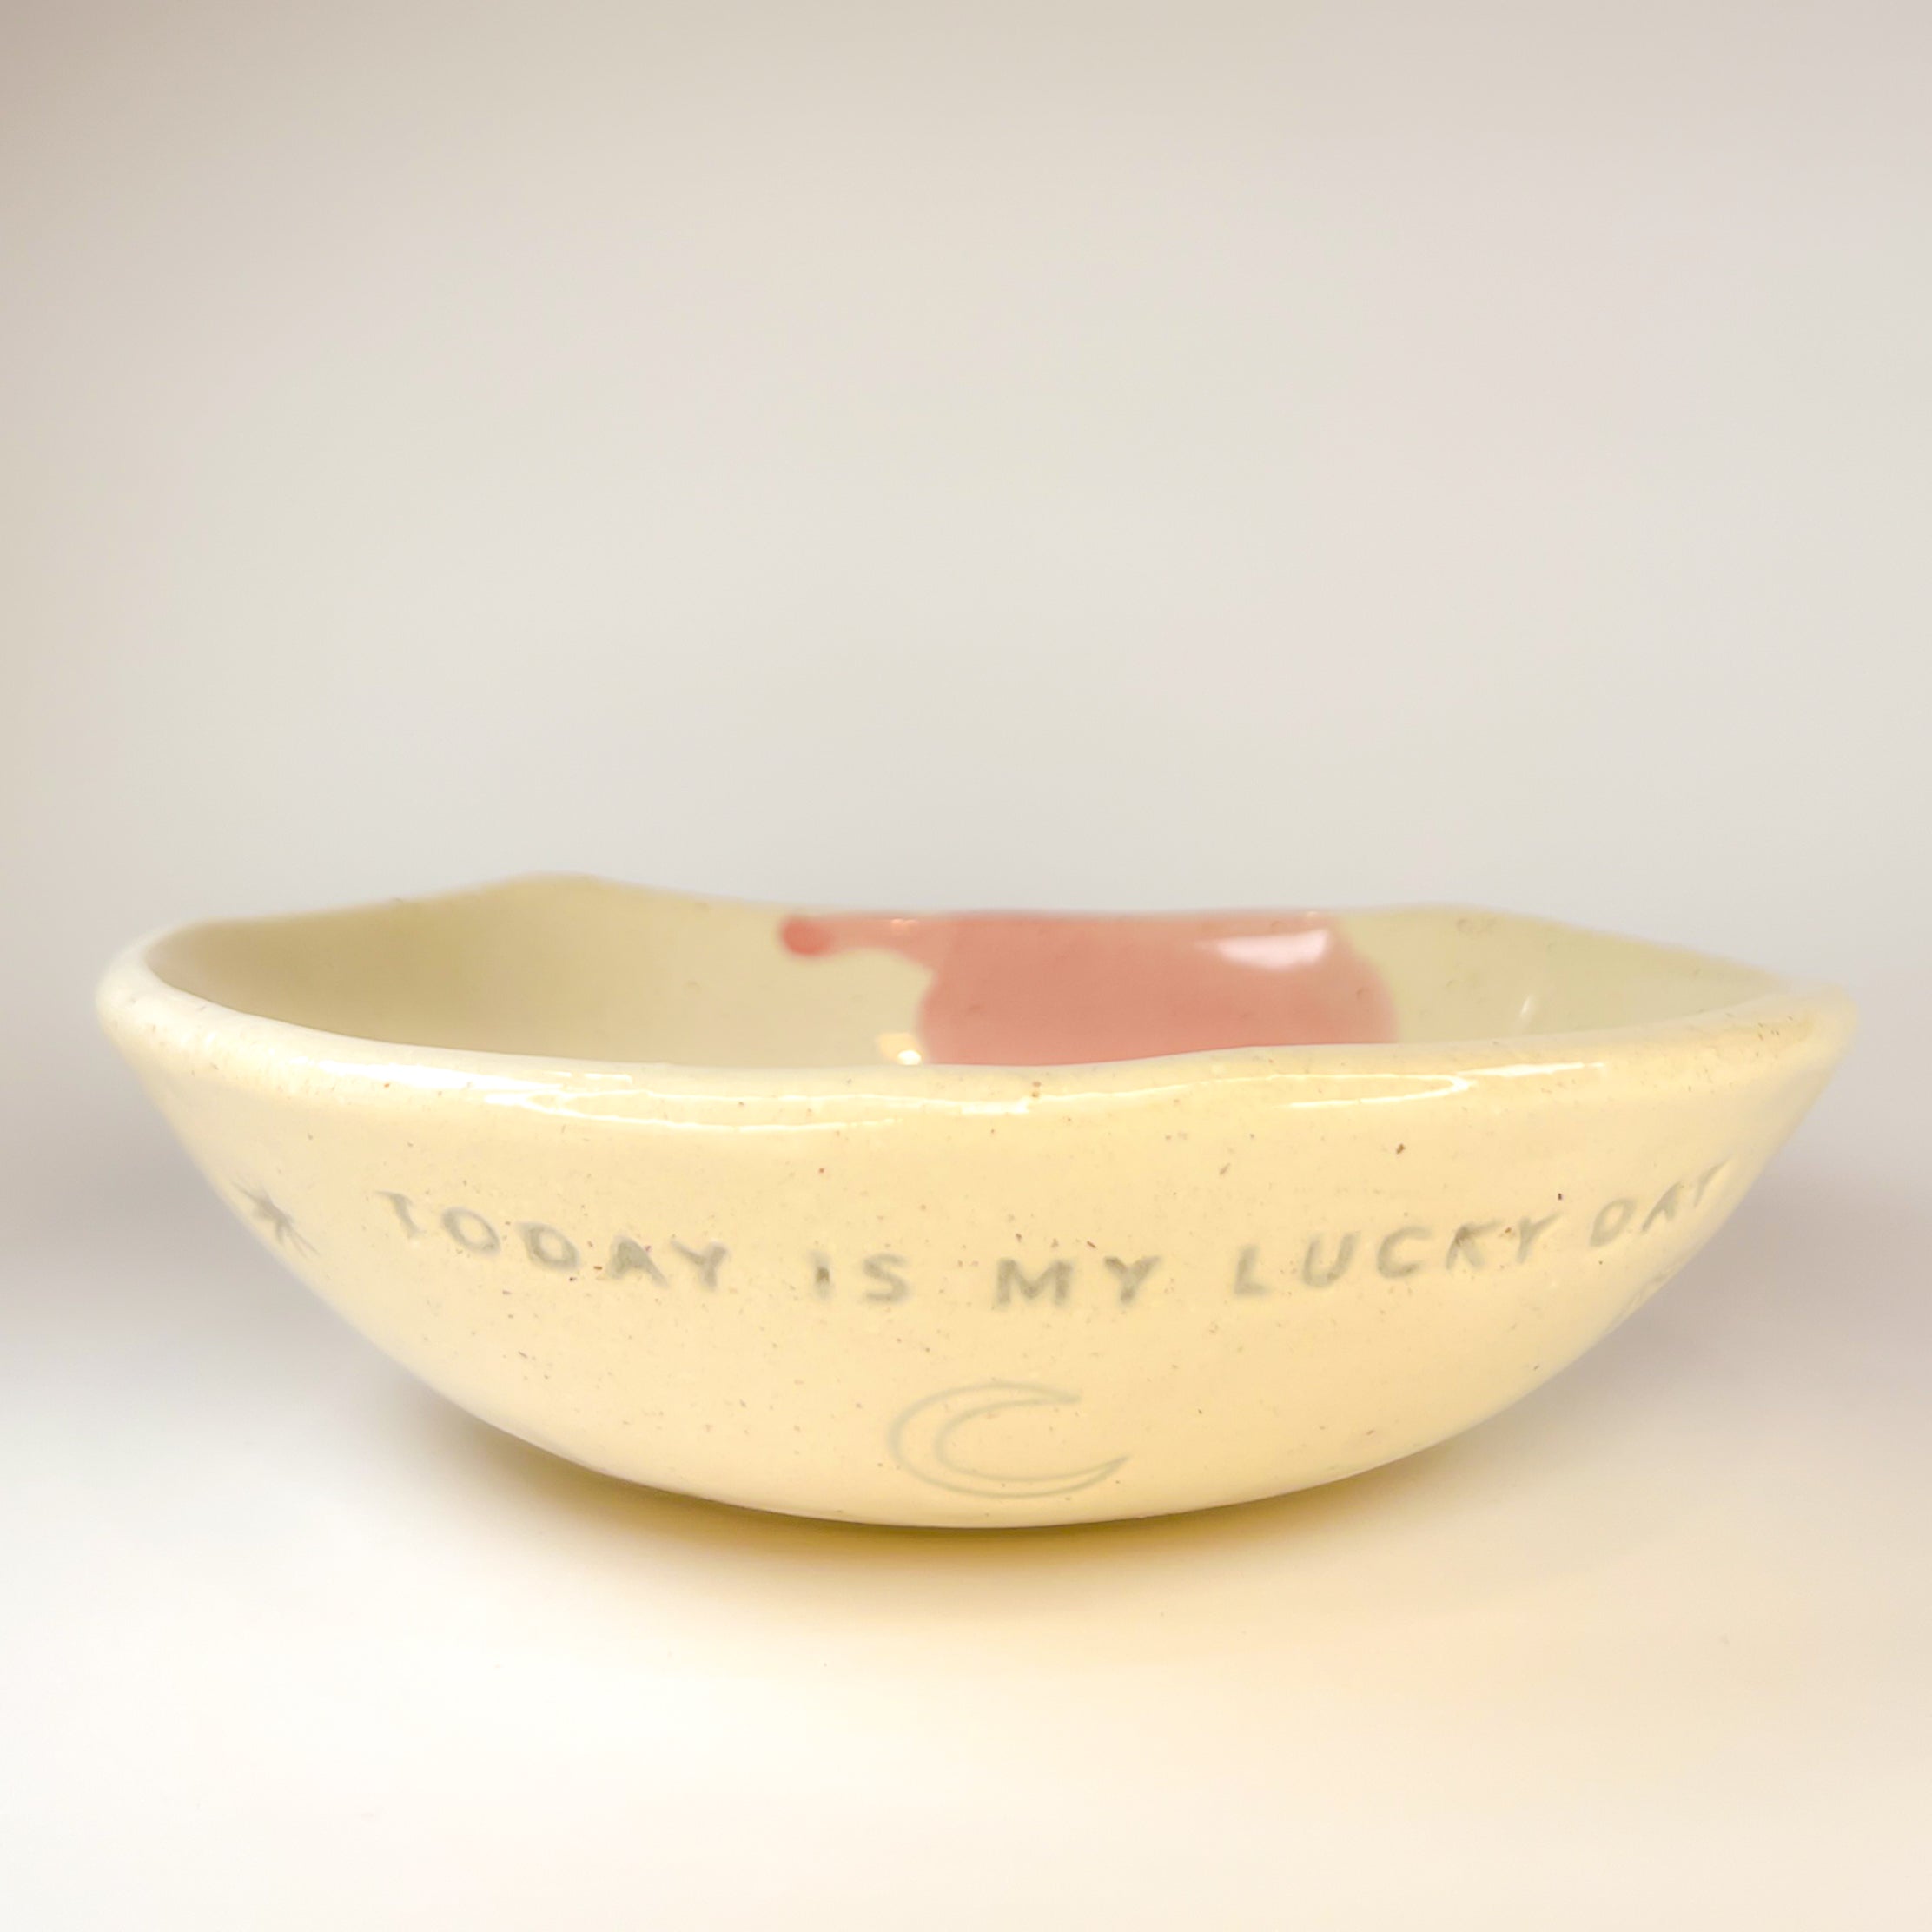 Bowl Mediano - Today is my lucky day